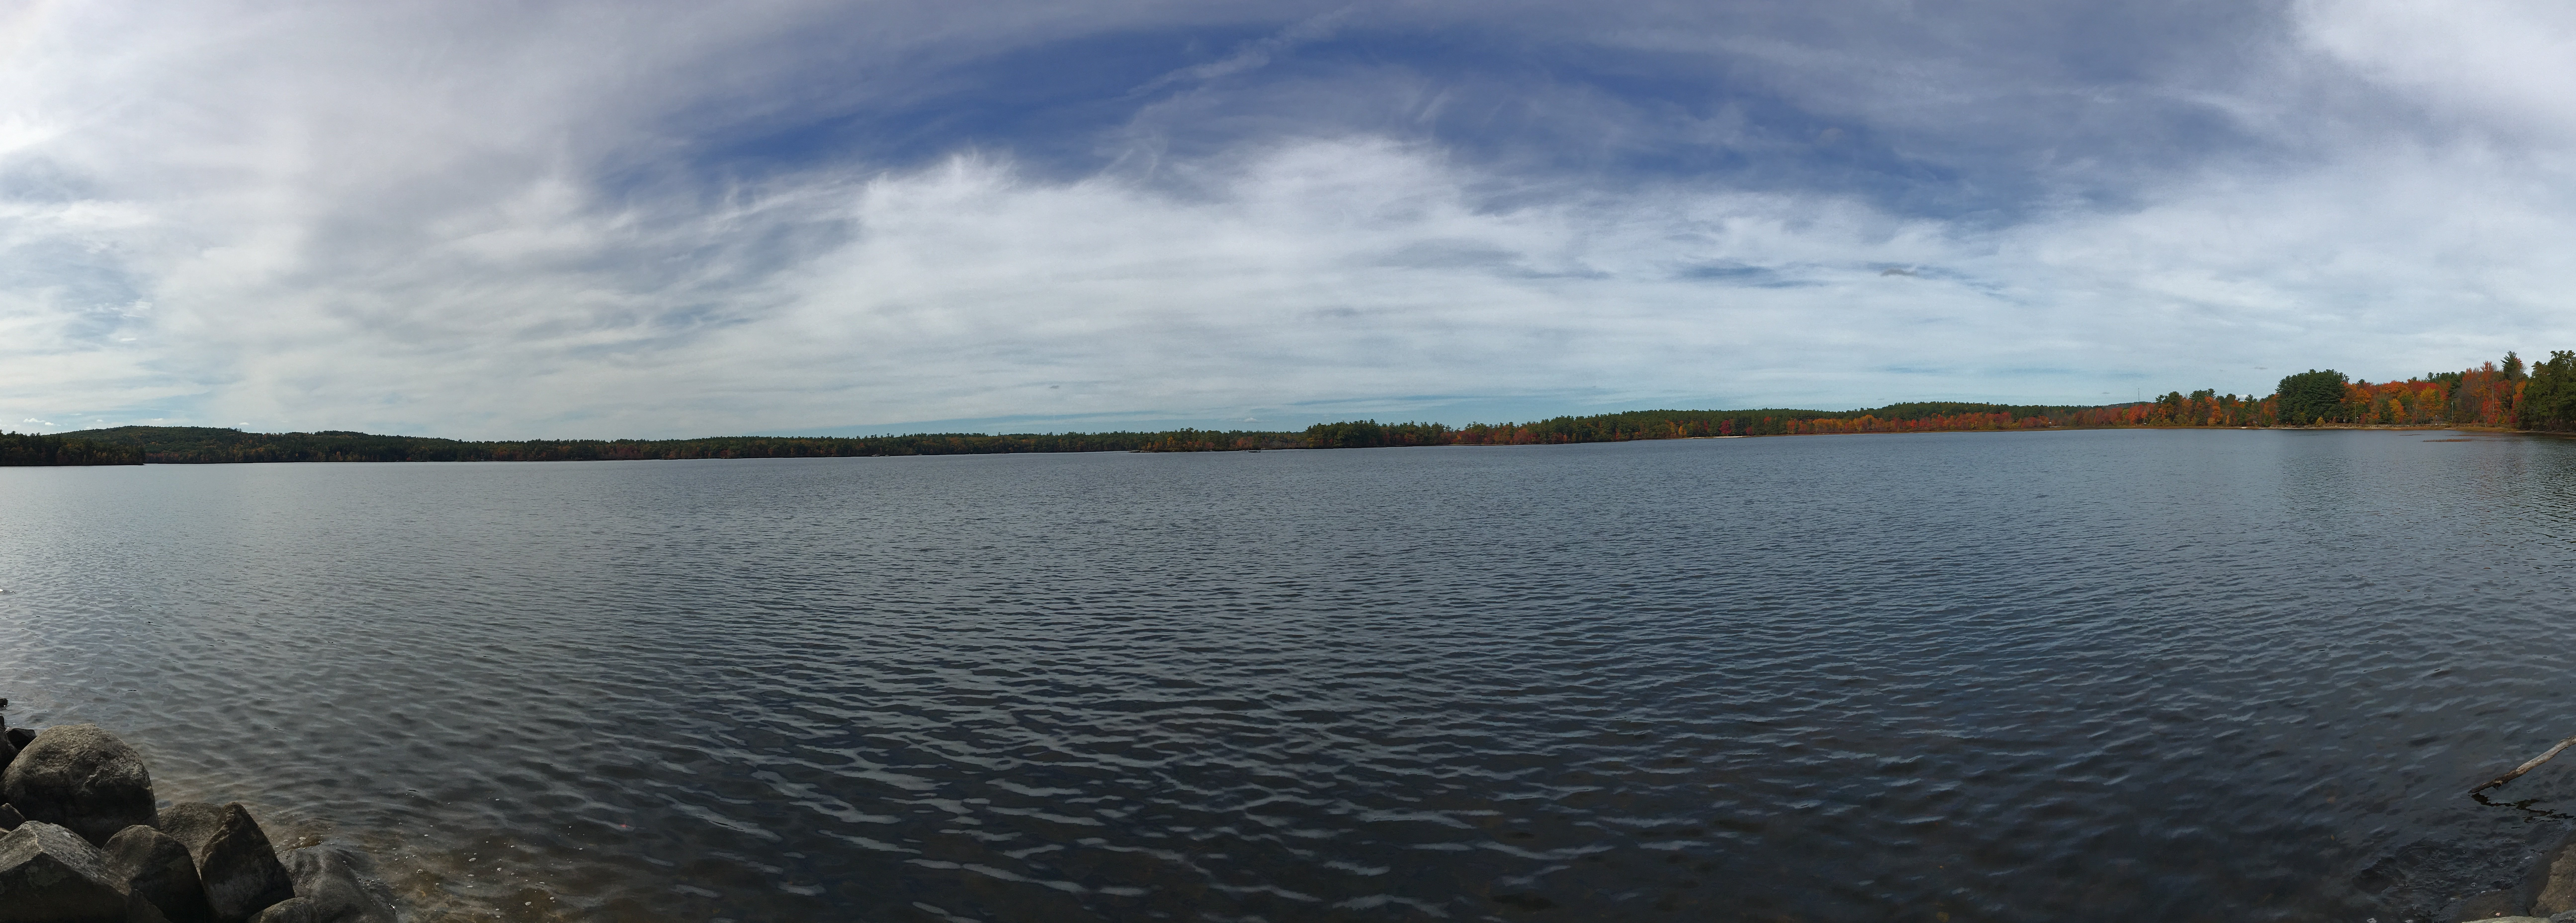 A wide shot of a lake; the opposite shore is barely visible, pressed between the dark lake and the sky streaked with clouds.